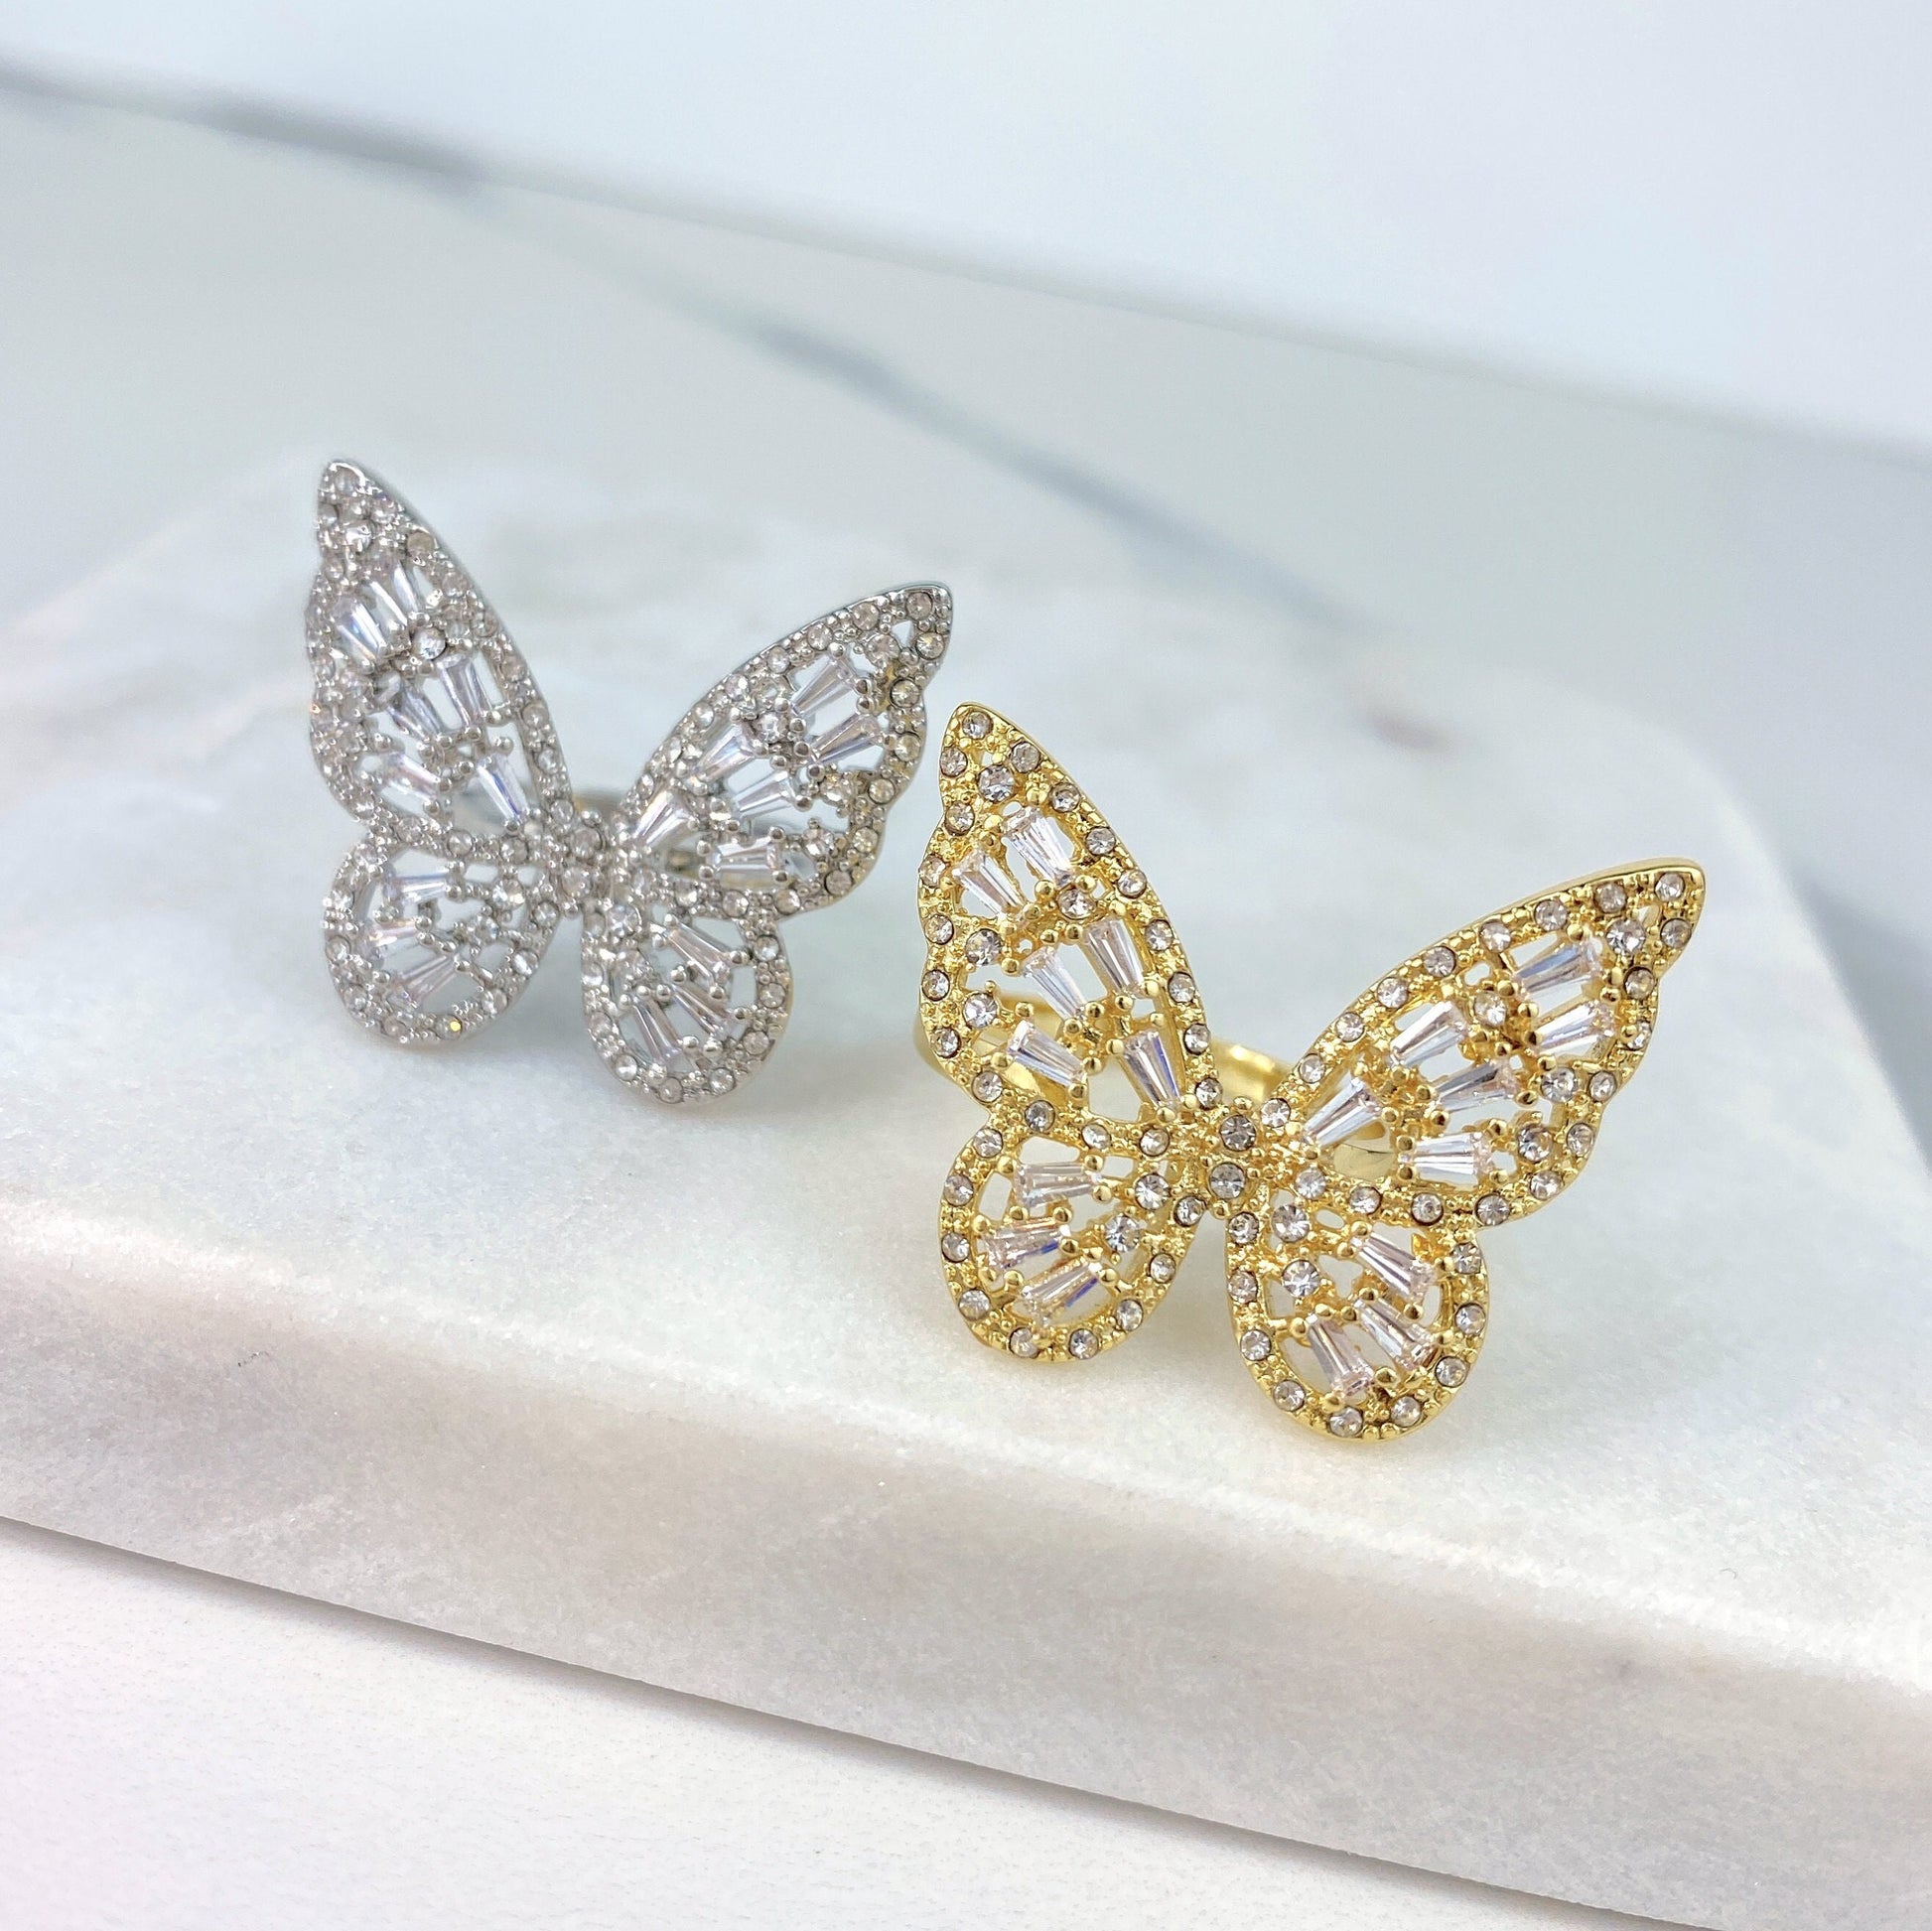 18k Gold Filled Micro Pave Cubic Zirconia Butterfly Adjustable Ring, Gold or Silver, Wholesale Jewelry Making Supplies